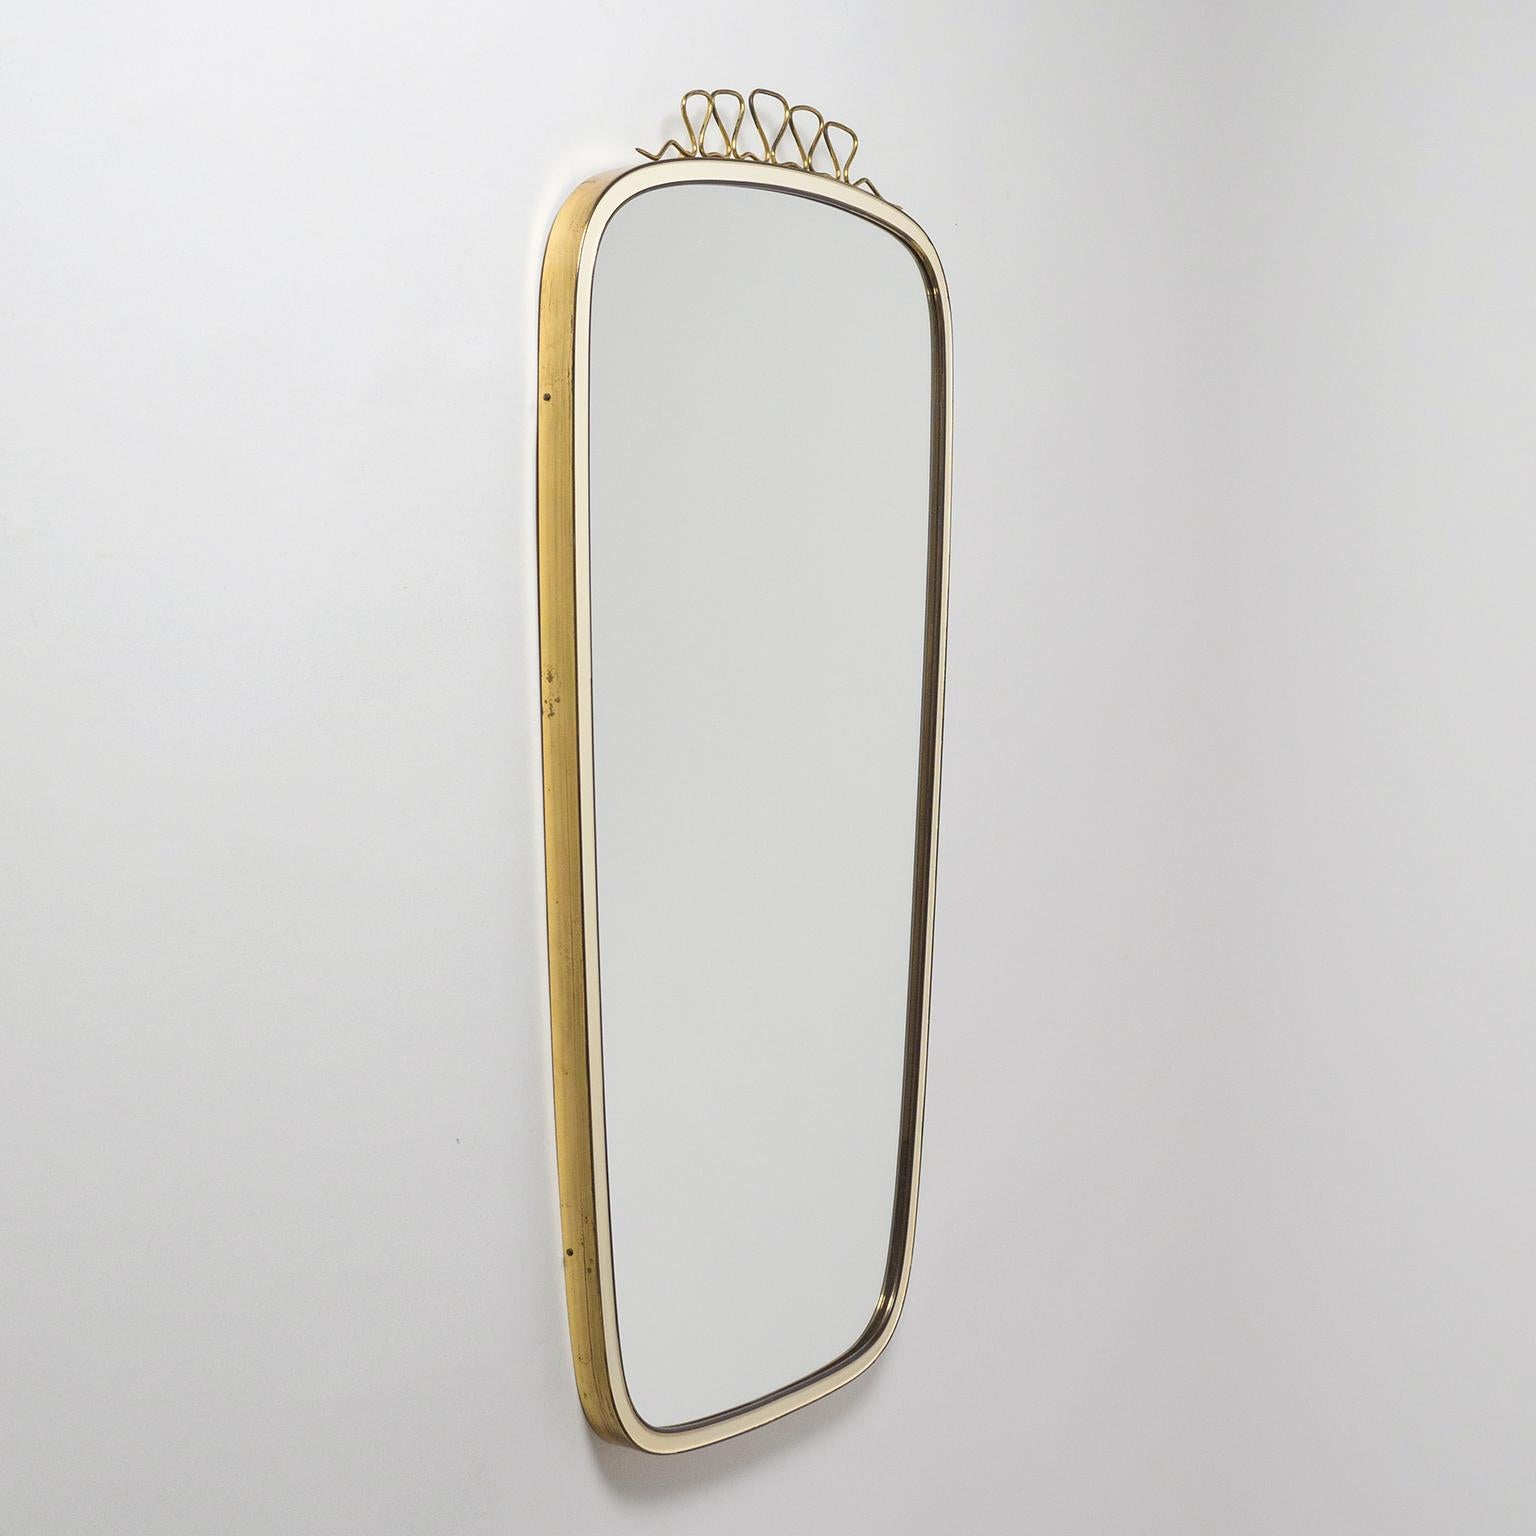 Lovely midcentury mirror with a sculpted brass rim which has a light ivory enamel coating on the inlet. Topped off with a charming undulating brass finial. Very good original condition with a bit of patina on the brass. Measures: Mirror size is